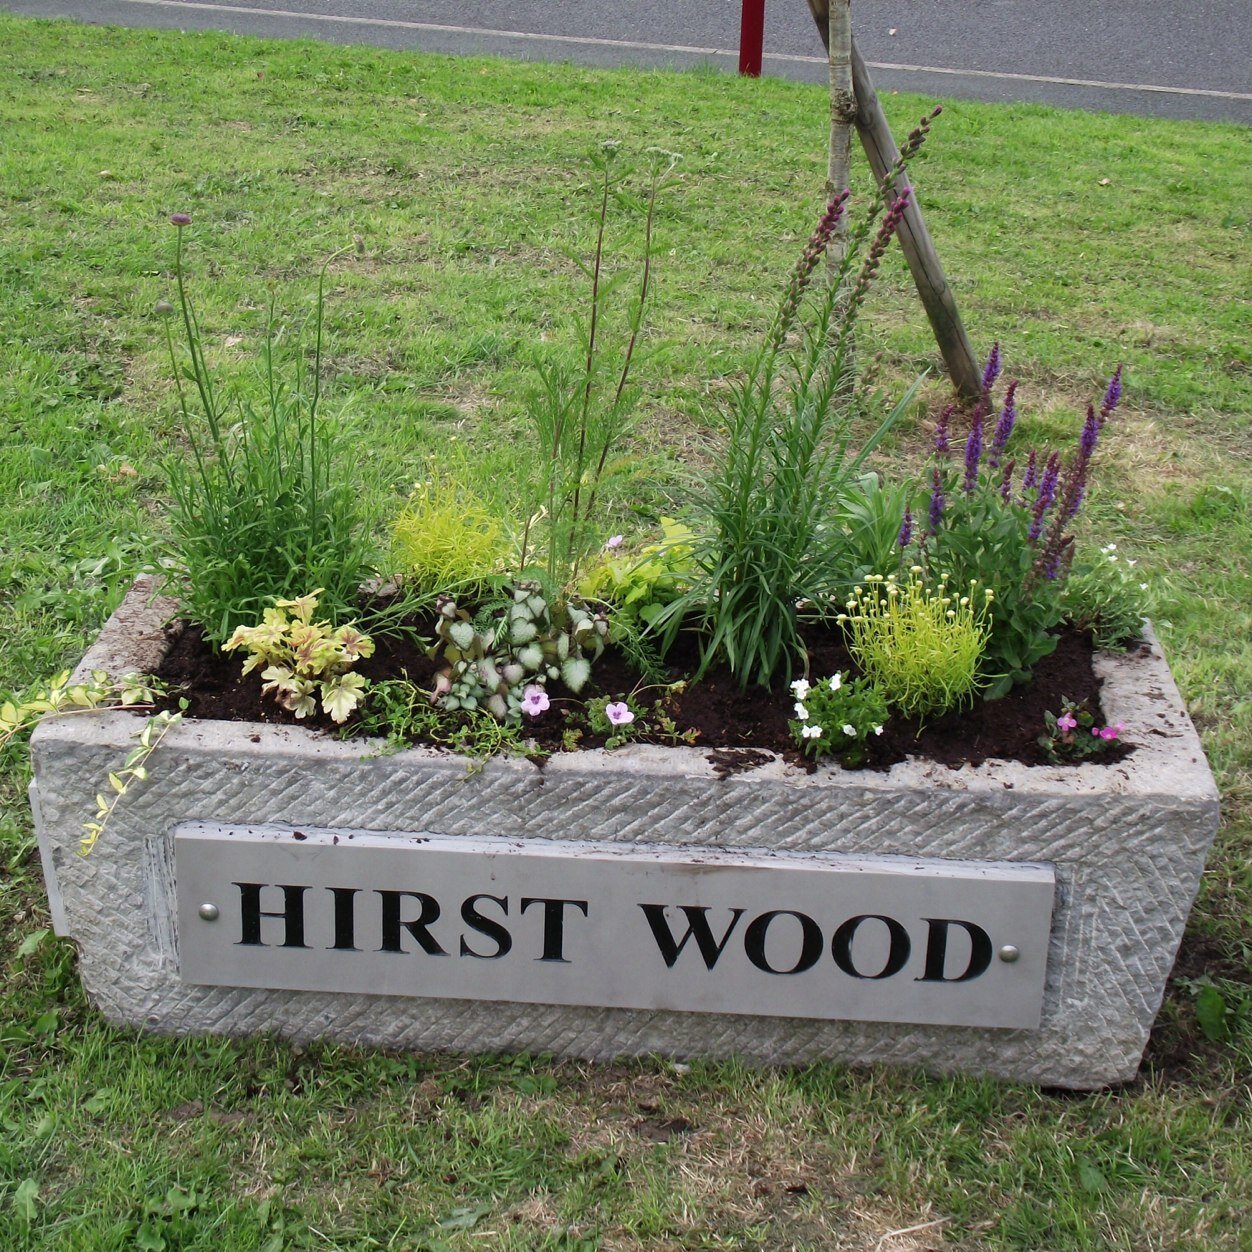 Hirst Wood Regeneration CIC - working to make HW an even better place to live. Meet first Wednesday of each month at Salts Sports Club 7.00. All welcome